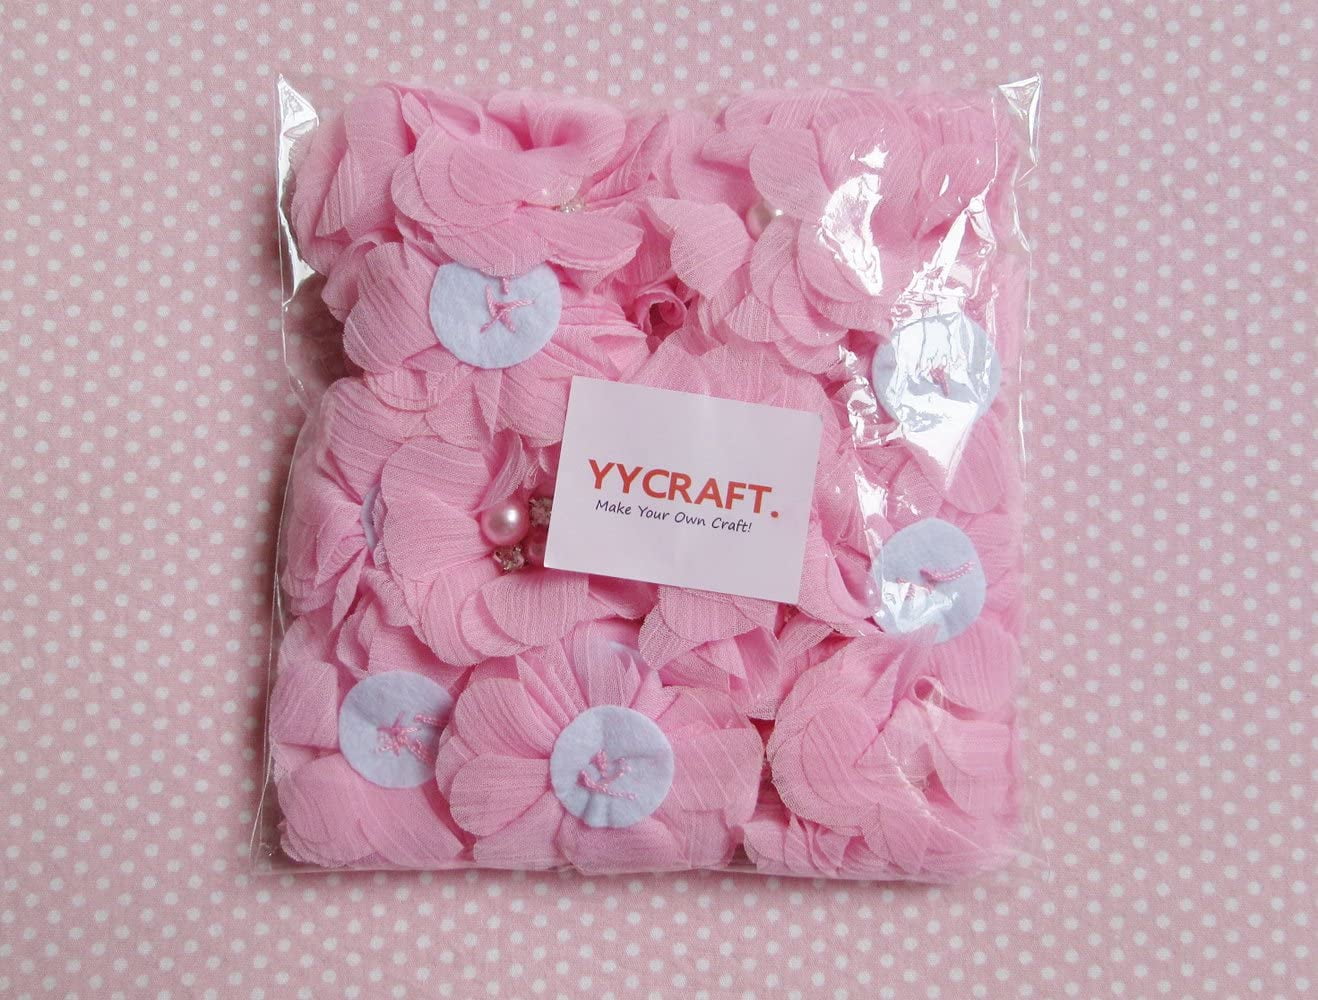 YYCRAFT Pack of 20 Pieces Chiffon 2 Flower Rhinestone for Craft Projects-Lt.Pink 